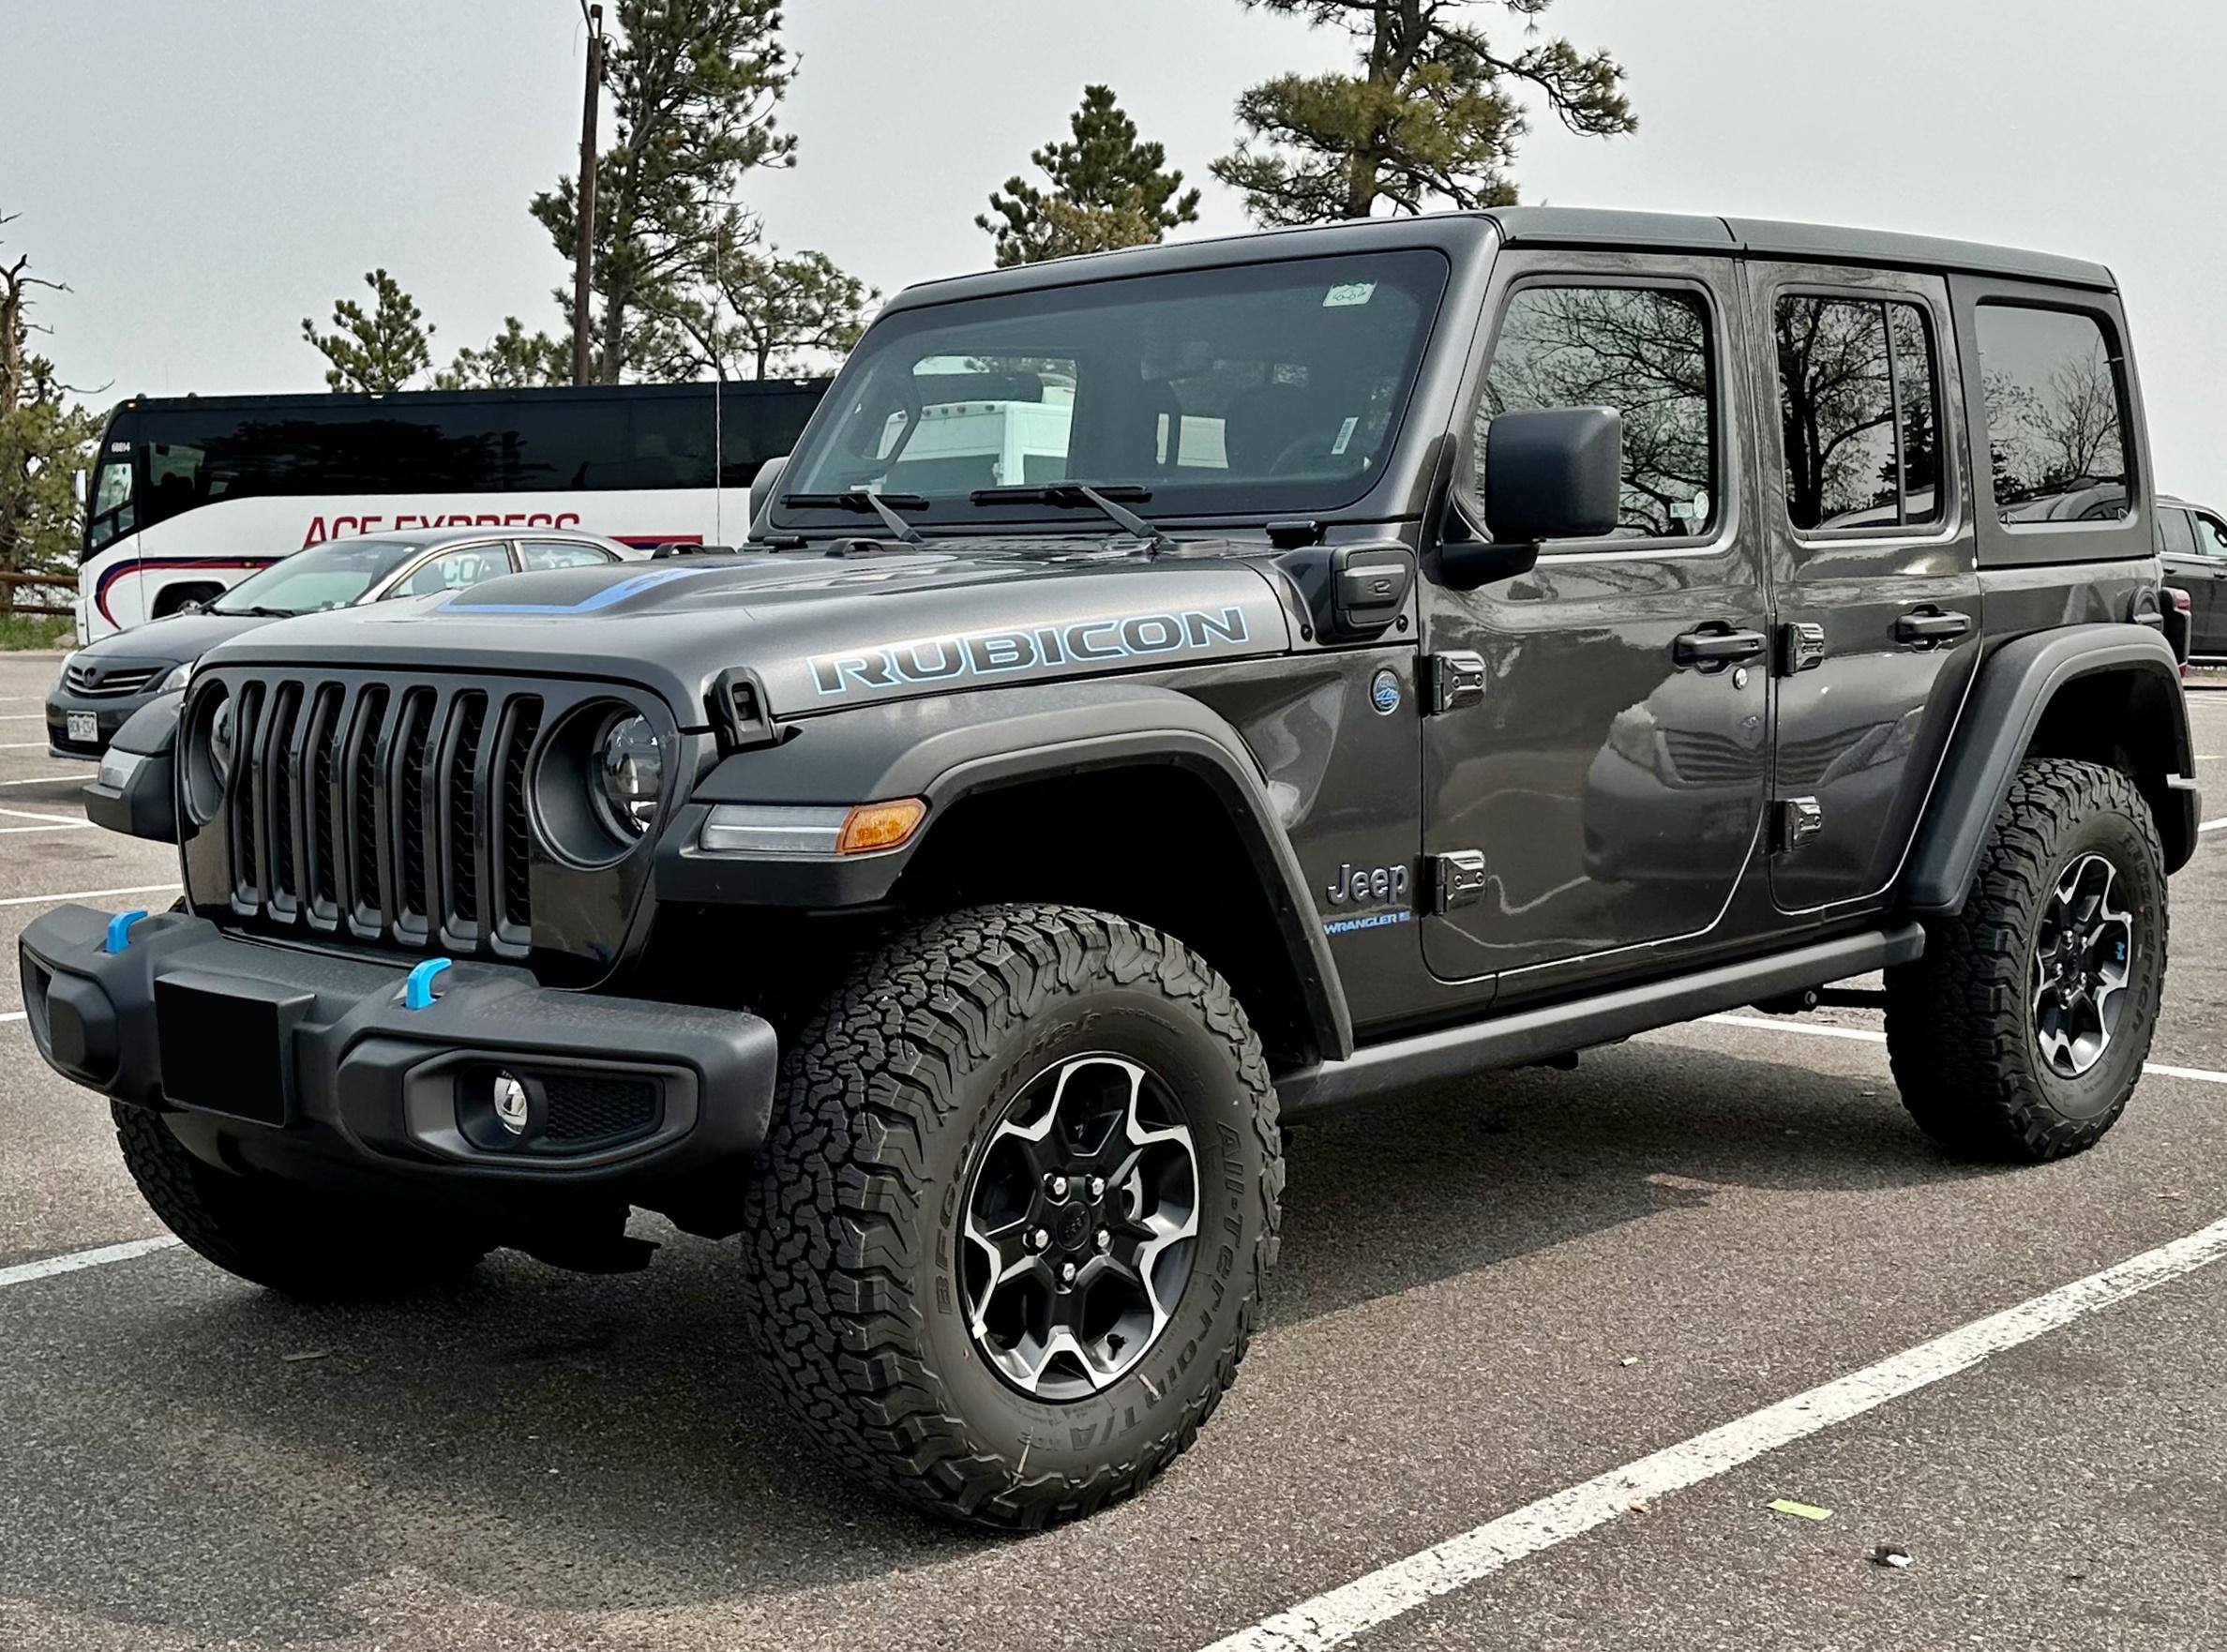 Common Misconceptions About YJ in the ⁣Jeep Community